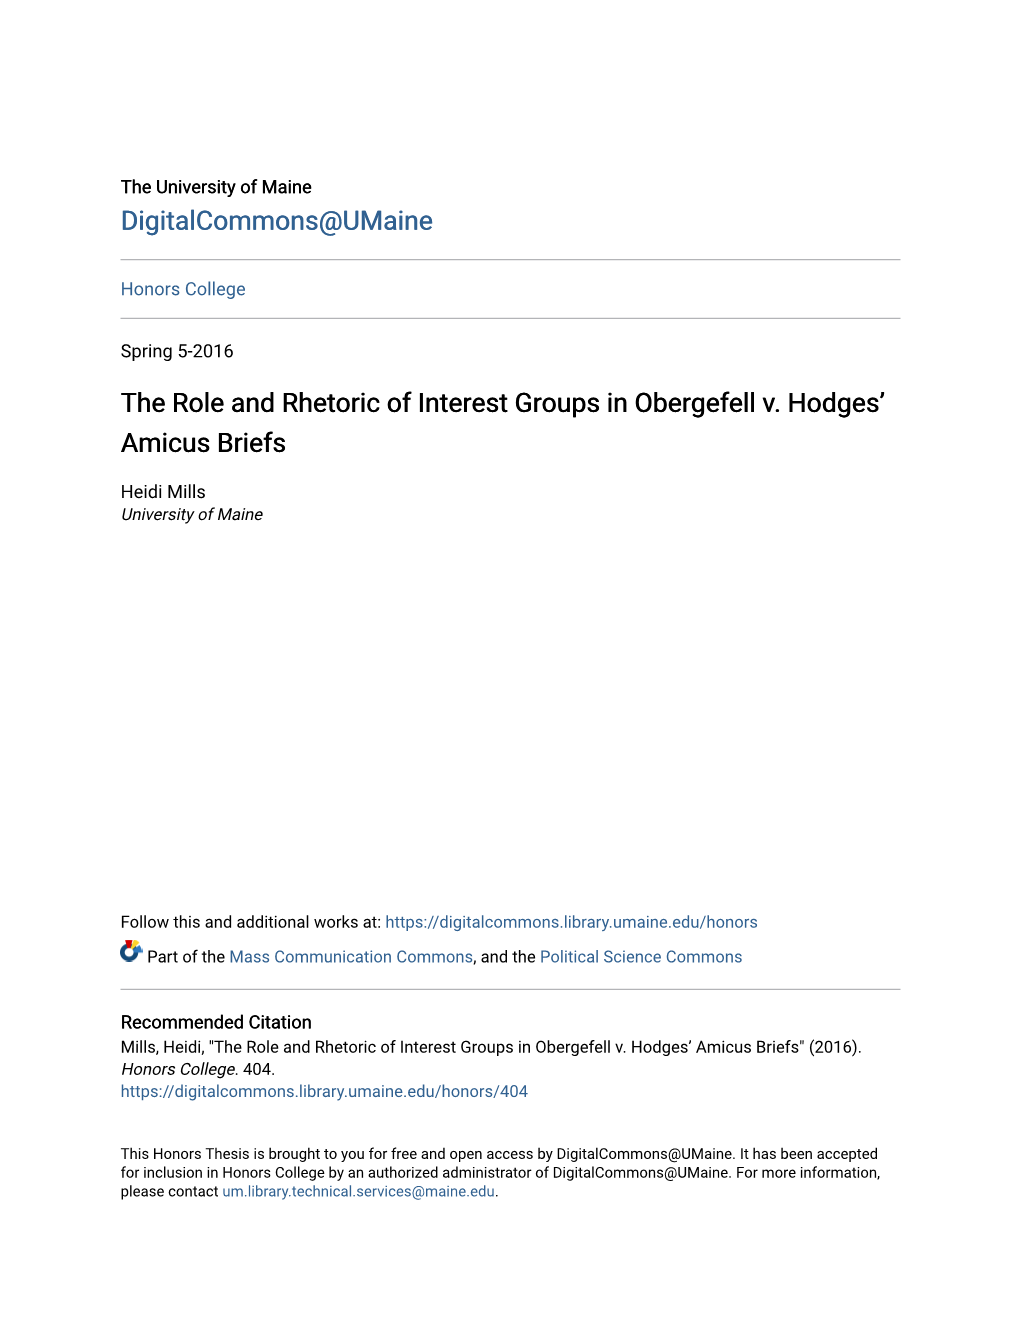 The Role and Rhetoric of Interest Groups in Obergefell V. Hodges’ Amicus Briefs